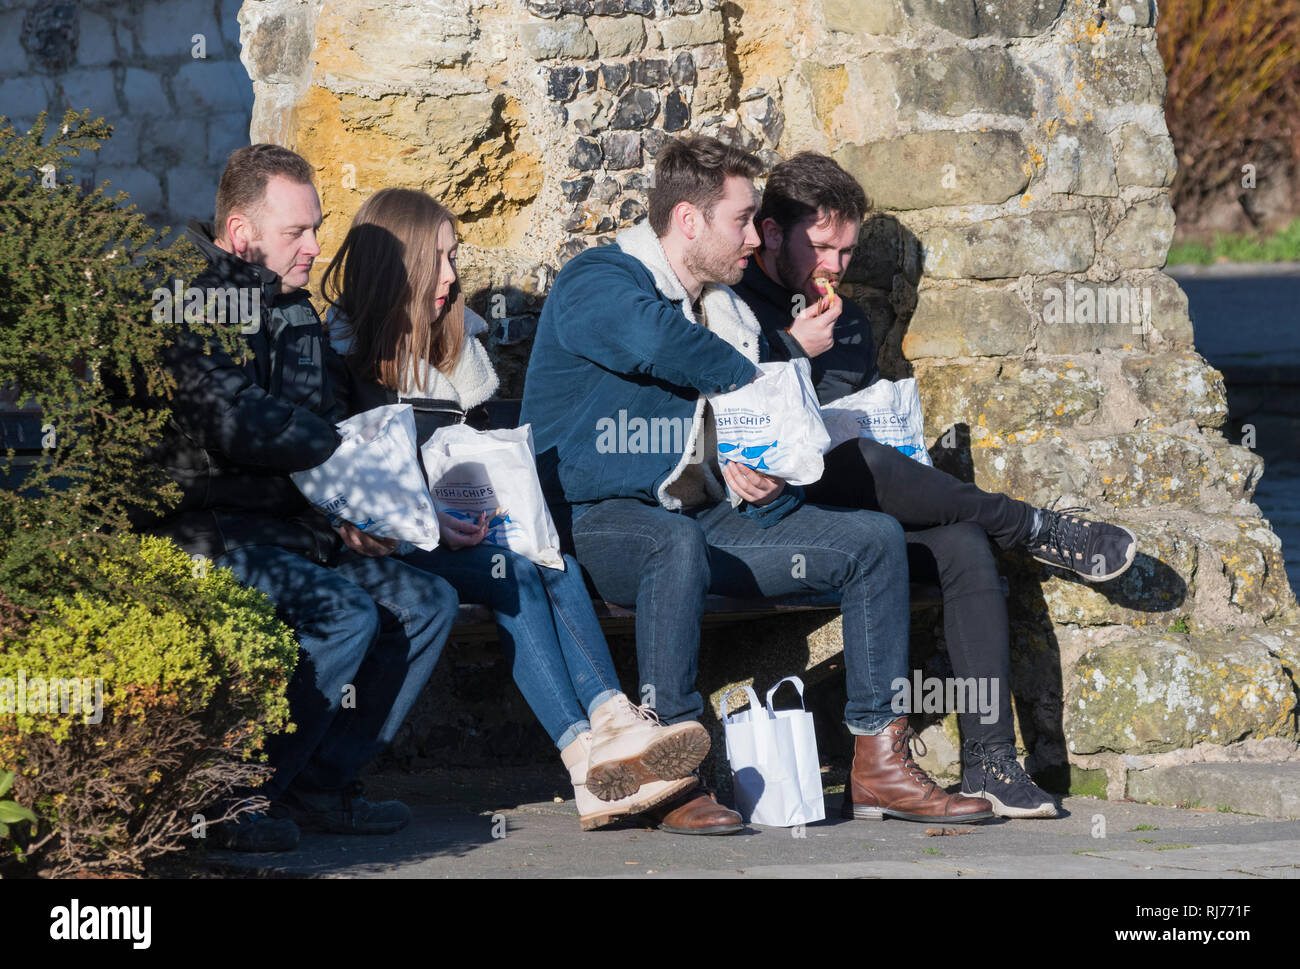 Group of young people sitting outside in Winter in the UK eating fish & chips from paper bags. Stock Photo